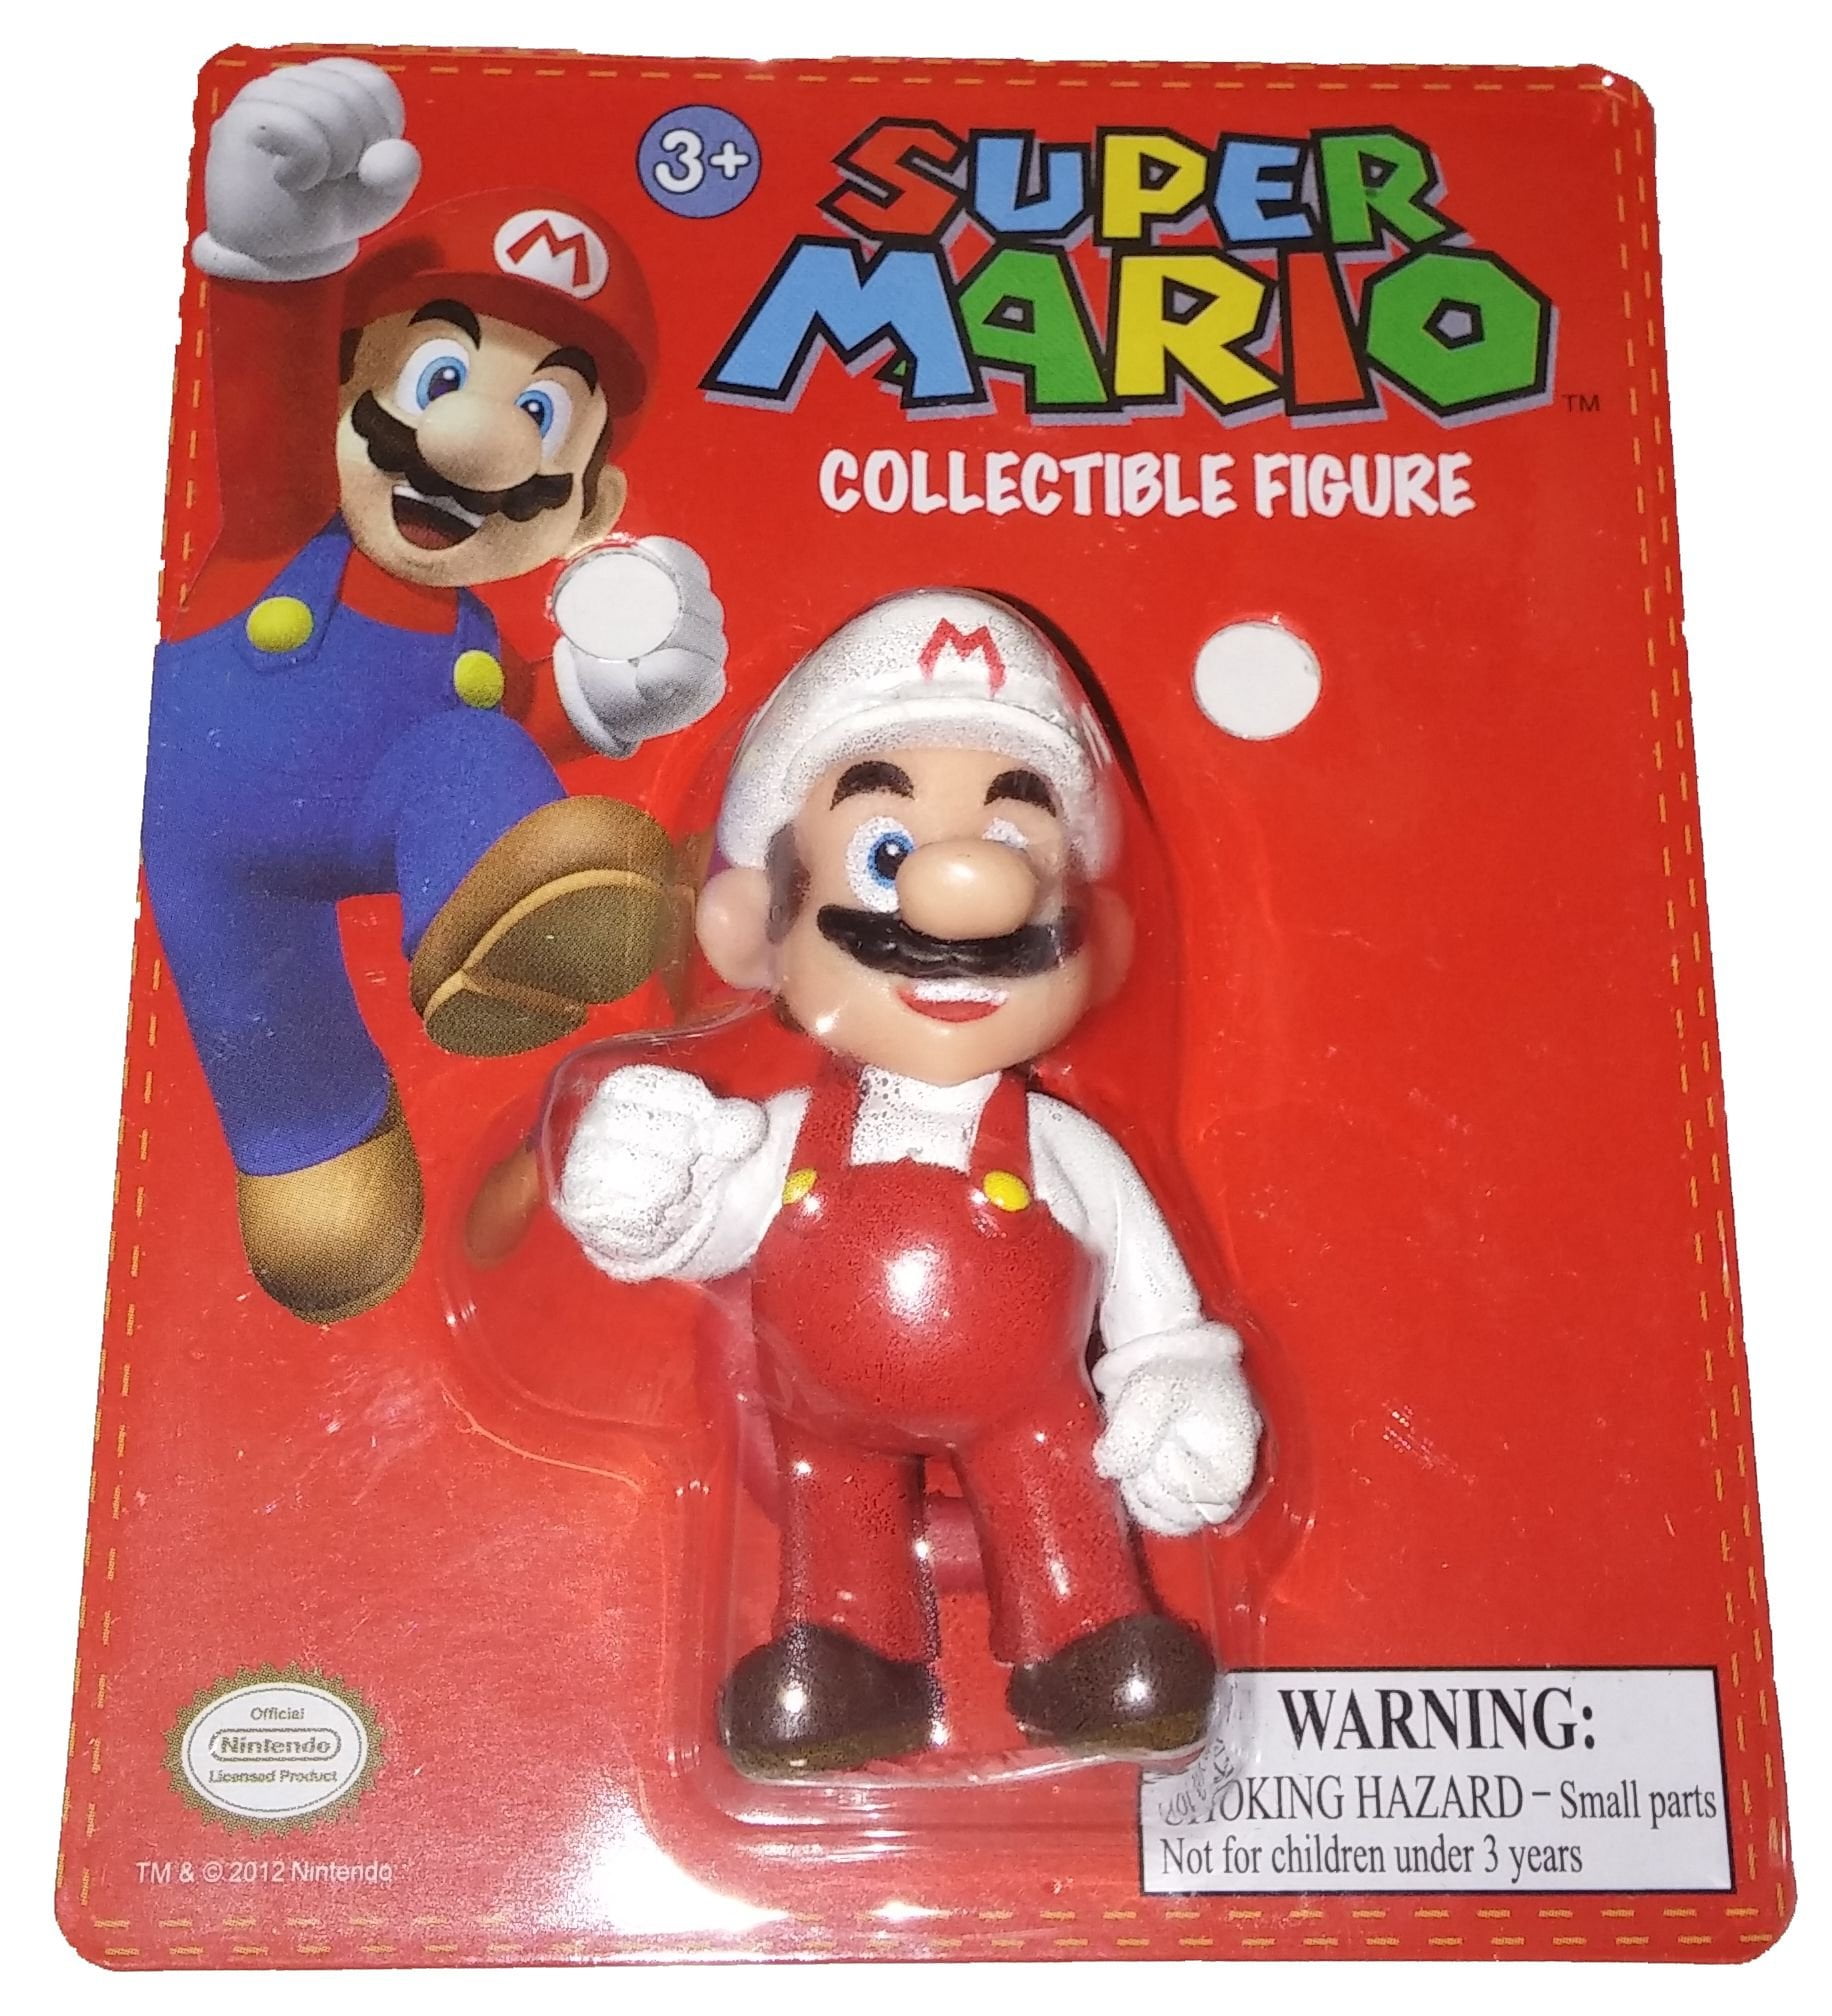 SUPER MARIO It's-A Me, Mario! Collectible Action Figure, Talking Posable  Mario Figure, 30+ Phrases and Game Sounds – 12 Inches Tall!, Orange